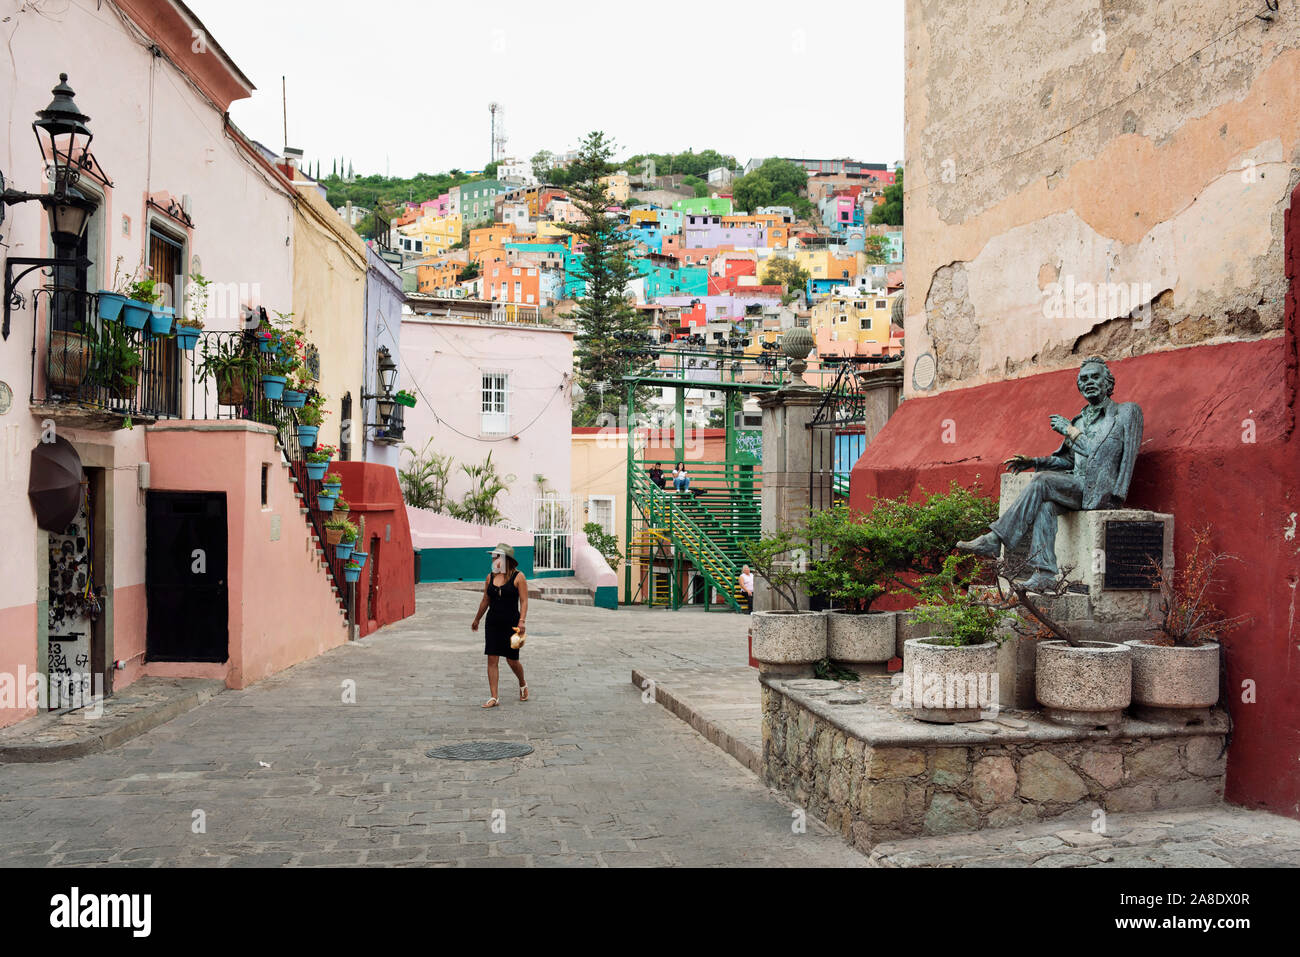 Beautiful street view of Roque Street with sculpture of Enrique Ruelas Espinosa. The historic centre of Guanajuato city, Mexico. Jun 2019 Stock Photo